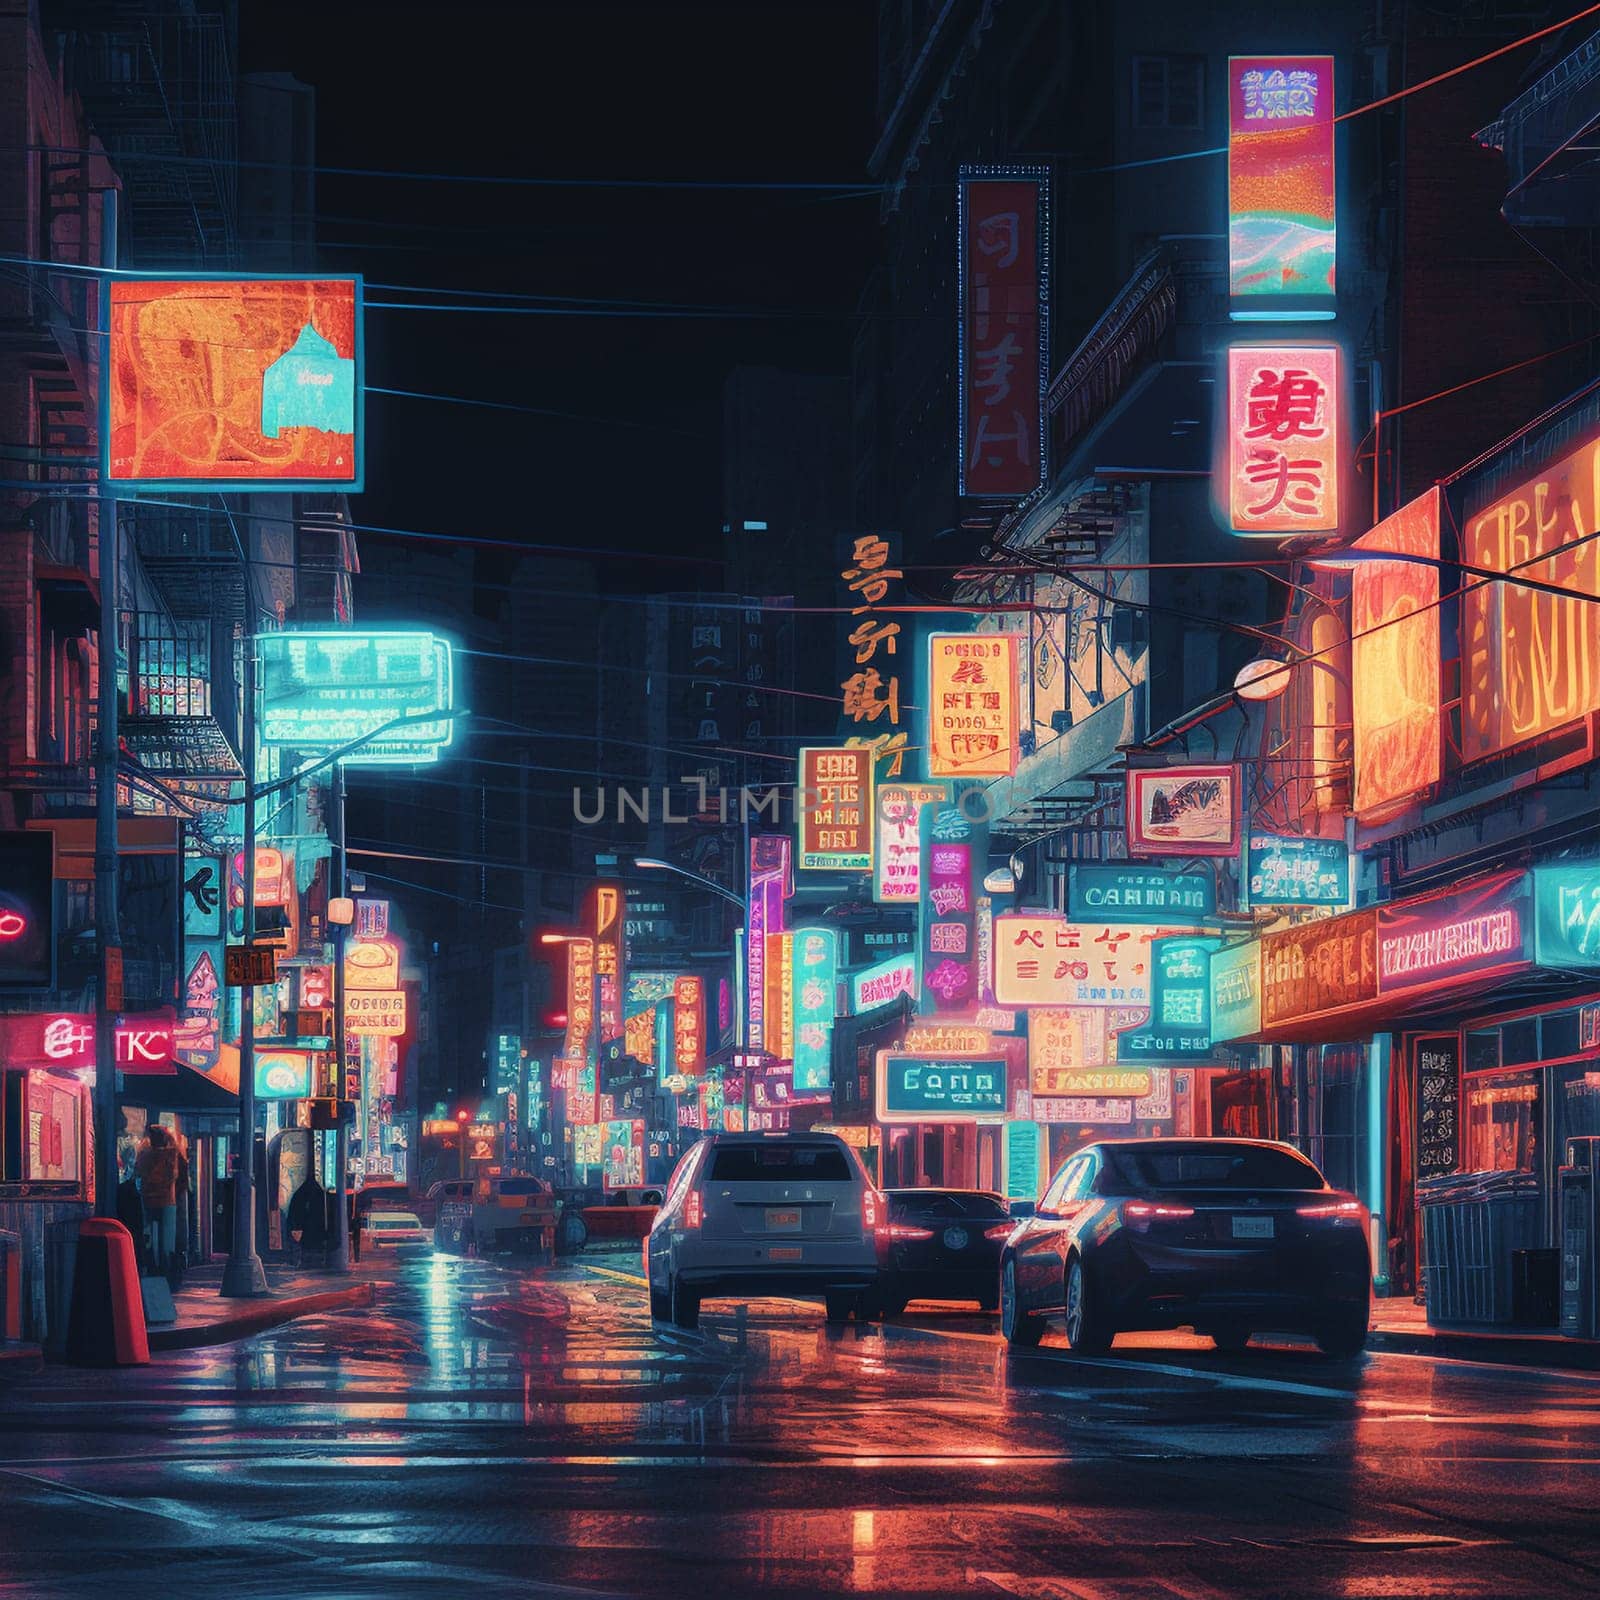 This image depicts a city street at night, with neon signs and billboards glowing brightly. The signs are rendered in bold, bright colors, creating a sense of energy and movement.